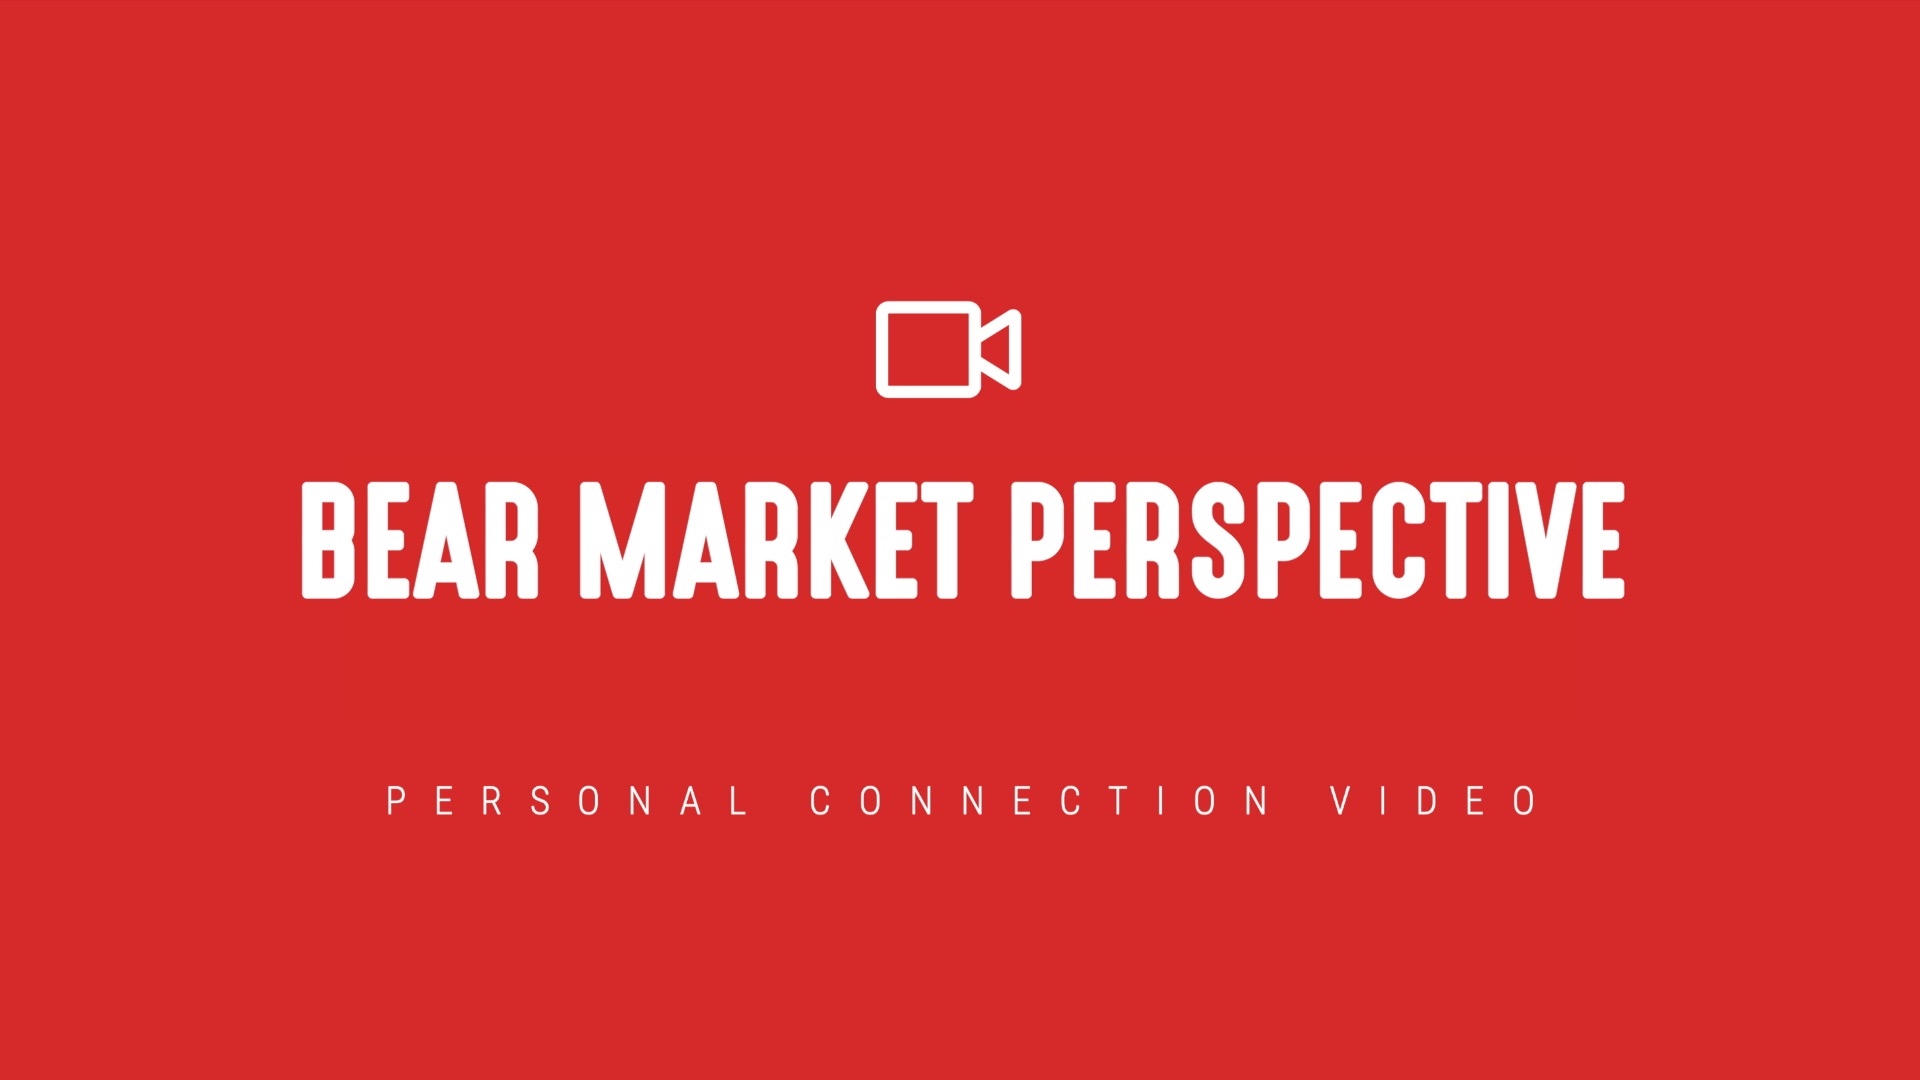 [NEW] Personal Connection Video | Bear Market Perspective